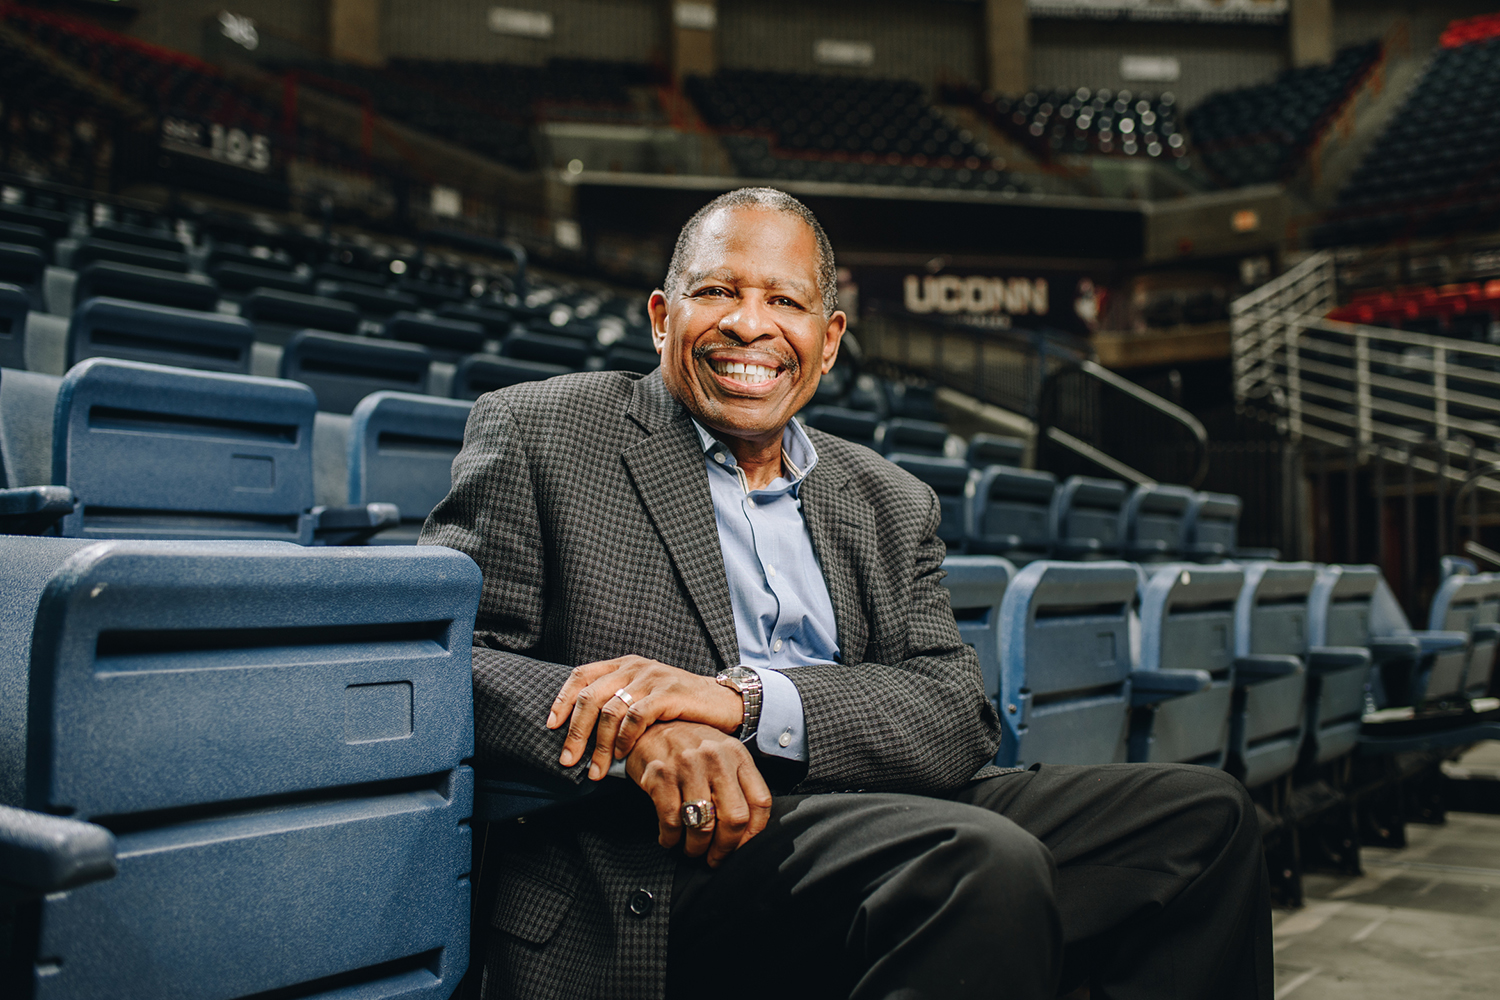 Patrick Harris ’70 (BUSN) returned to UConn this week to speak about diversity at the Rosenberg-McVay Business Leadership Luncheon, as well as to address students from UConn’s Scholars House. (Nathan Oldham / UConn School of Business)